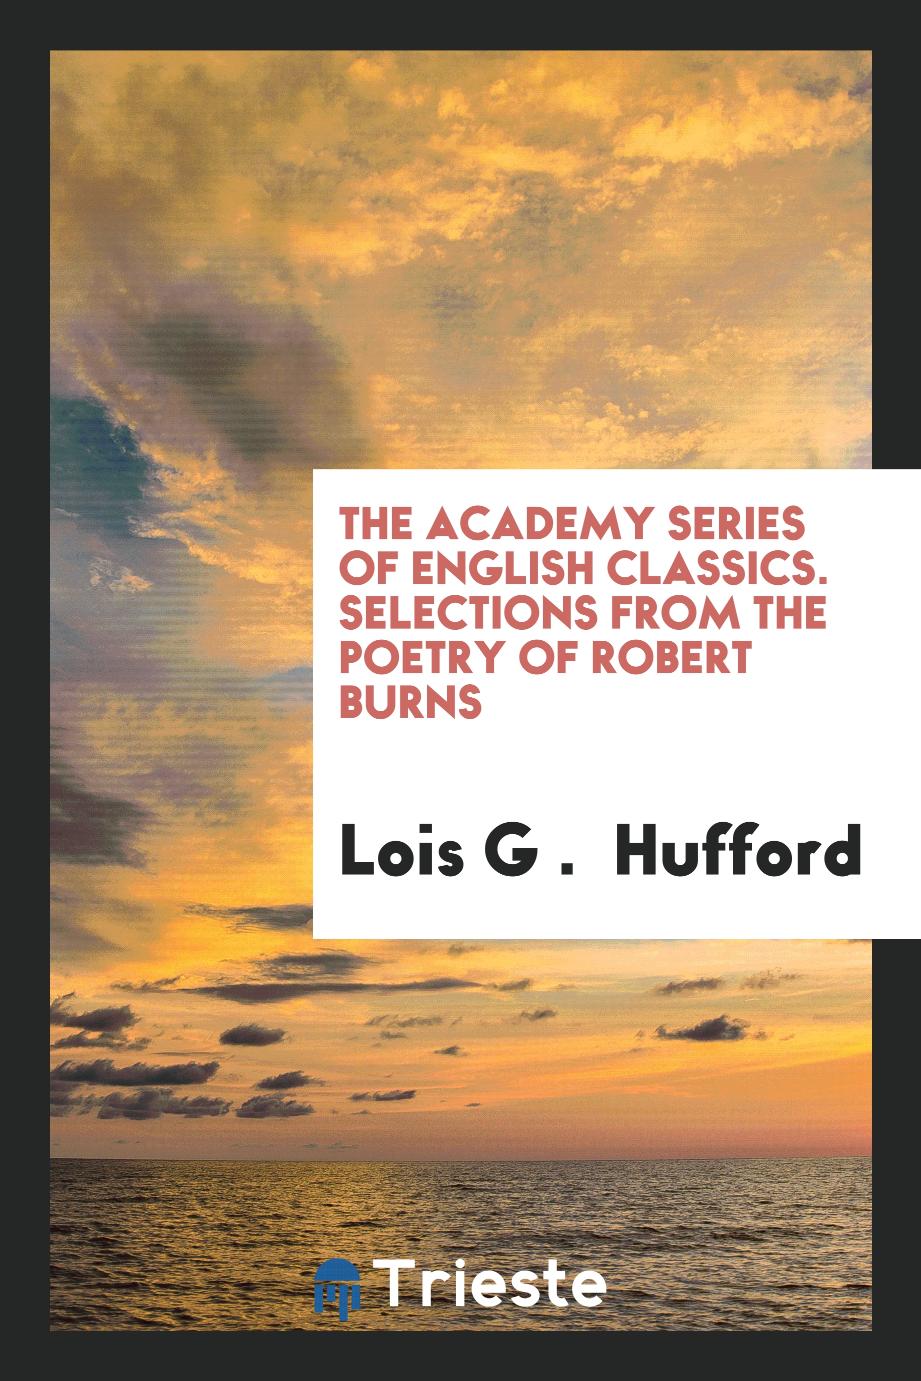 The Academy Series of English Classics. Selections from the Poetry of Robert Burns